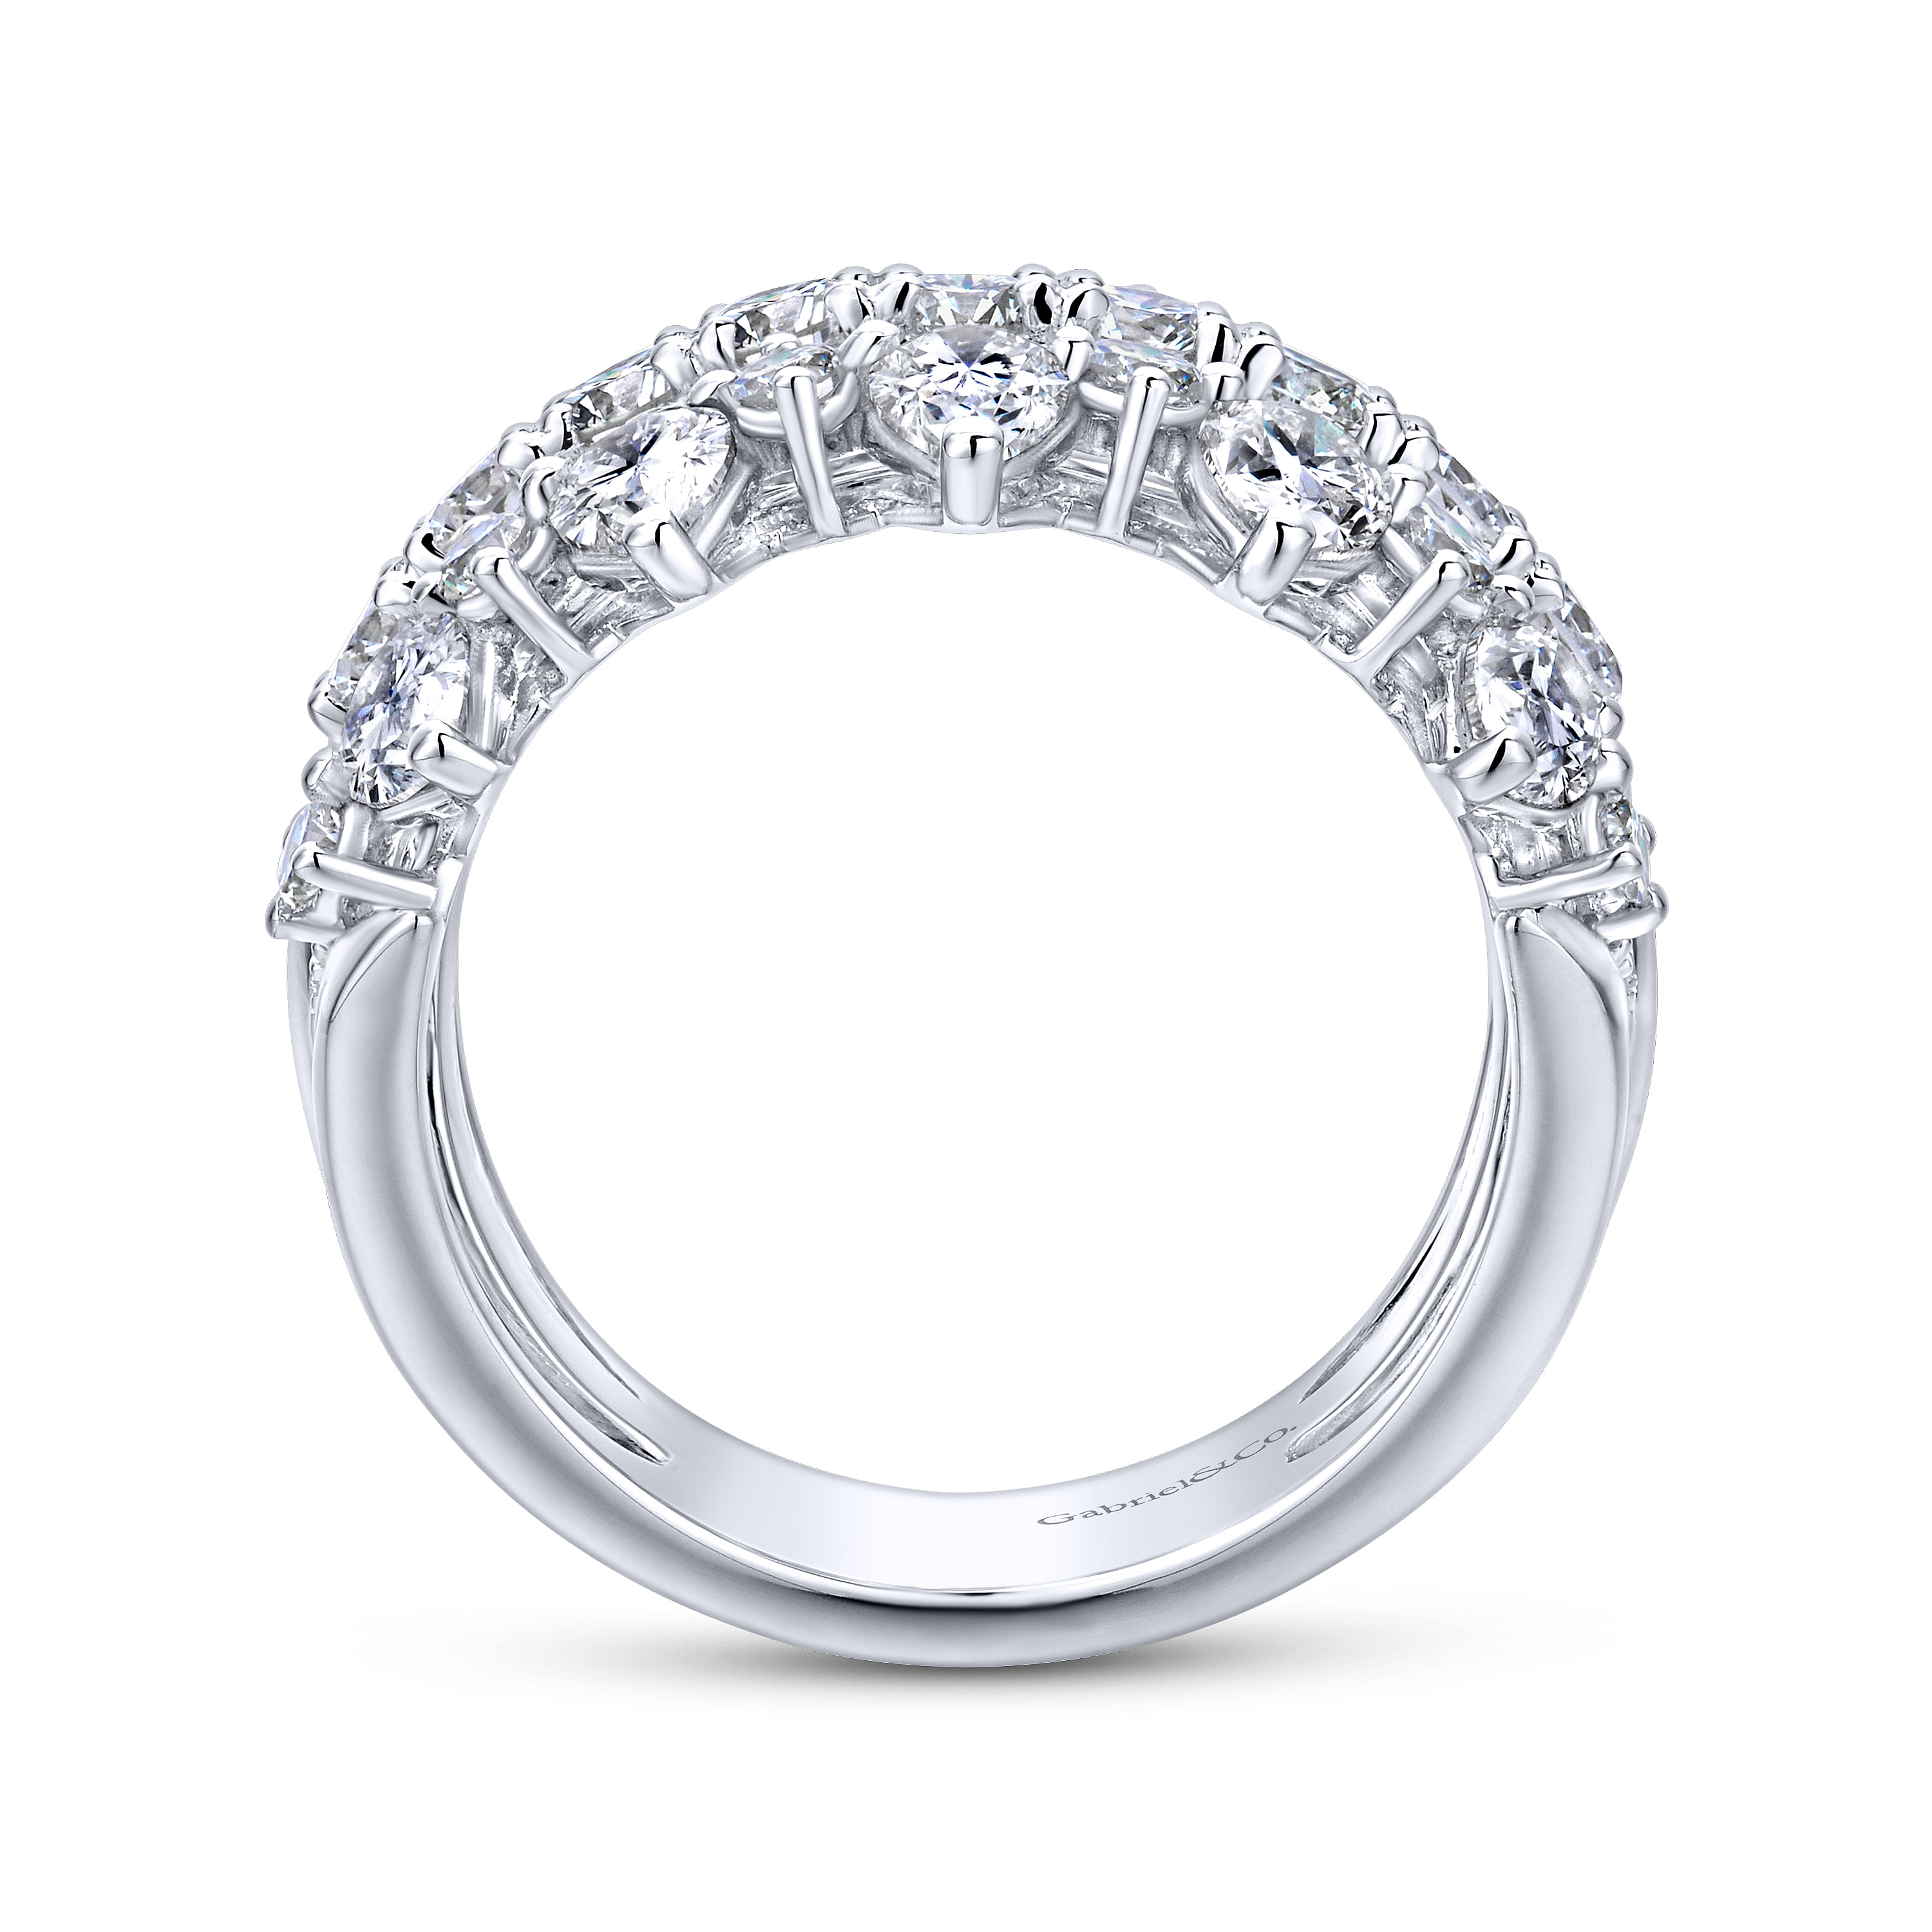 Wide 14K White Gold Round and Pear Shaped Diamond Anniversary Band